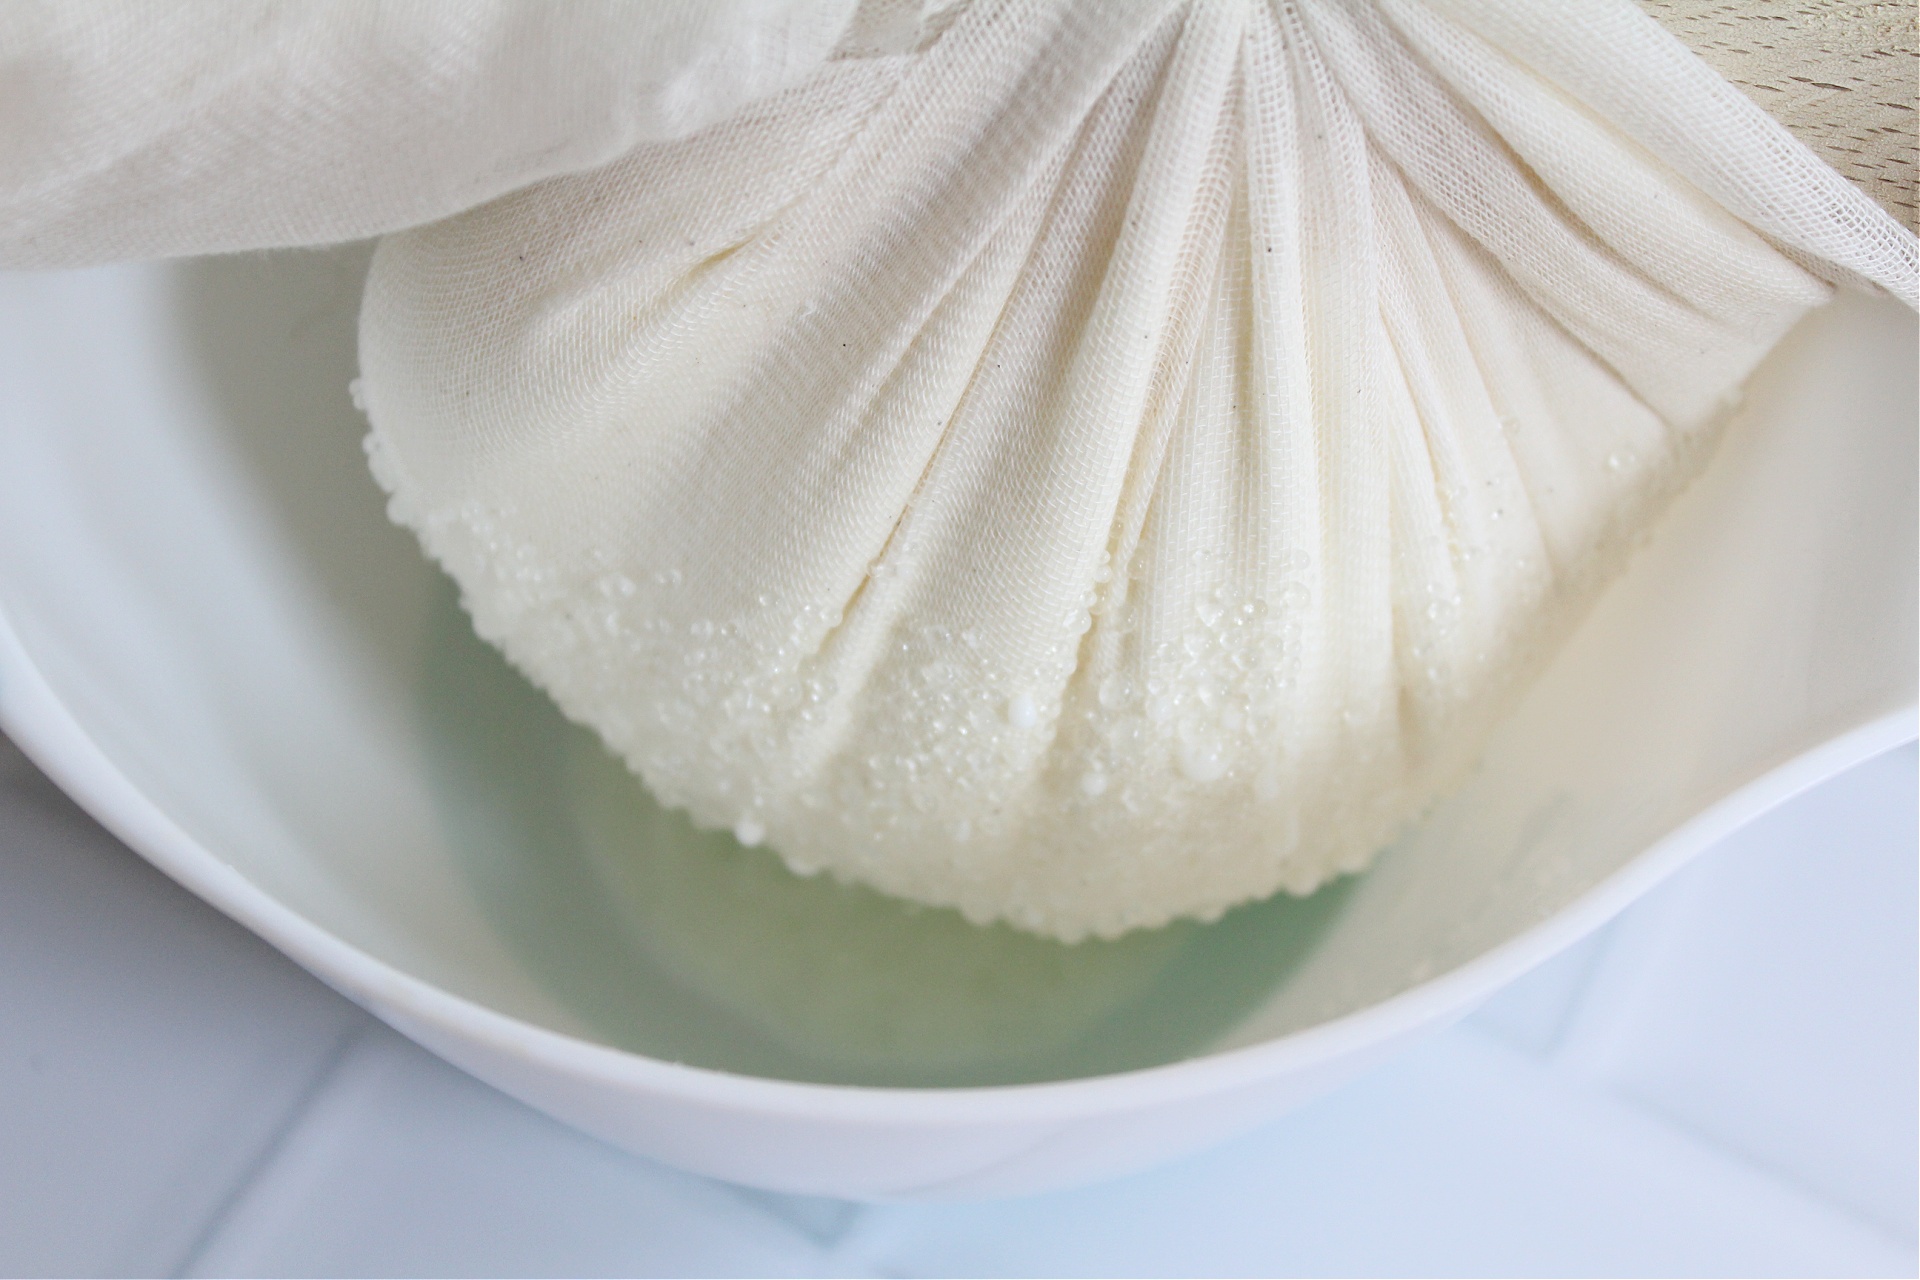 making labneh cheese with cheesecloth